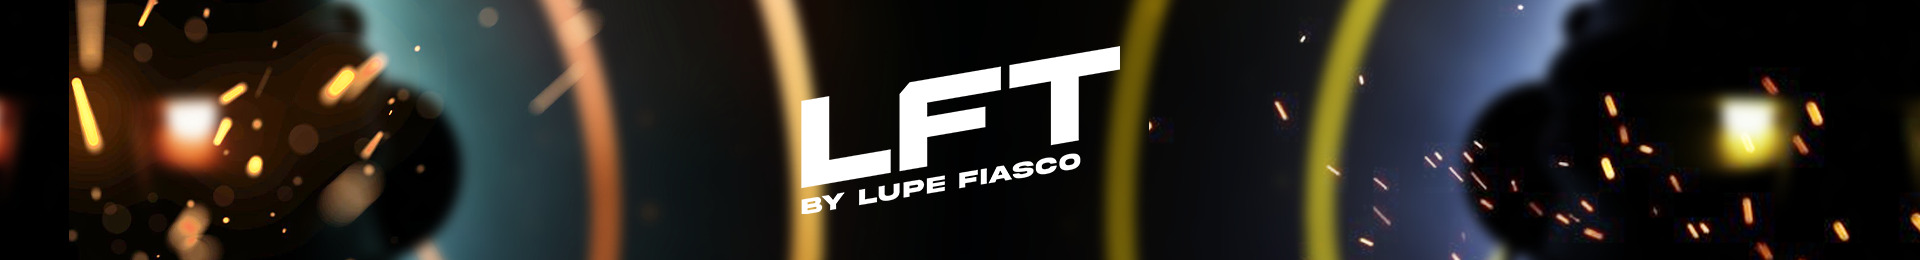 LFT by Lupe Fiasco